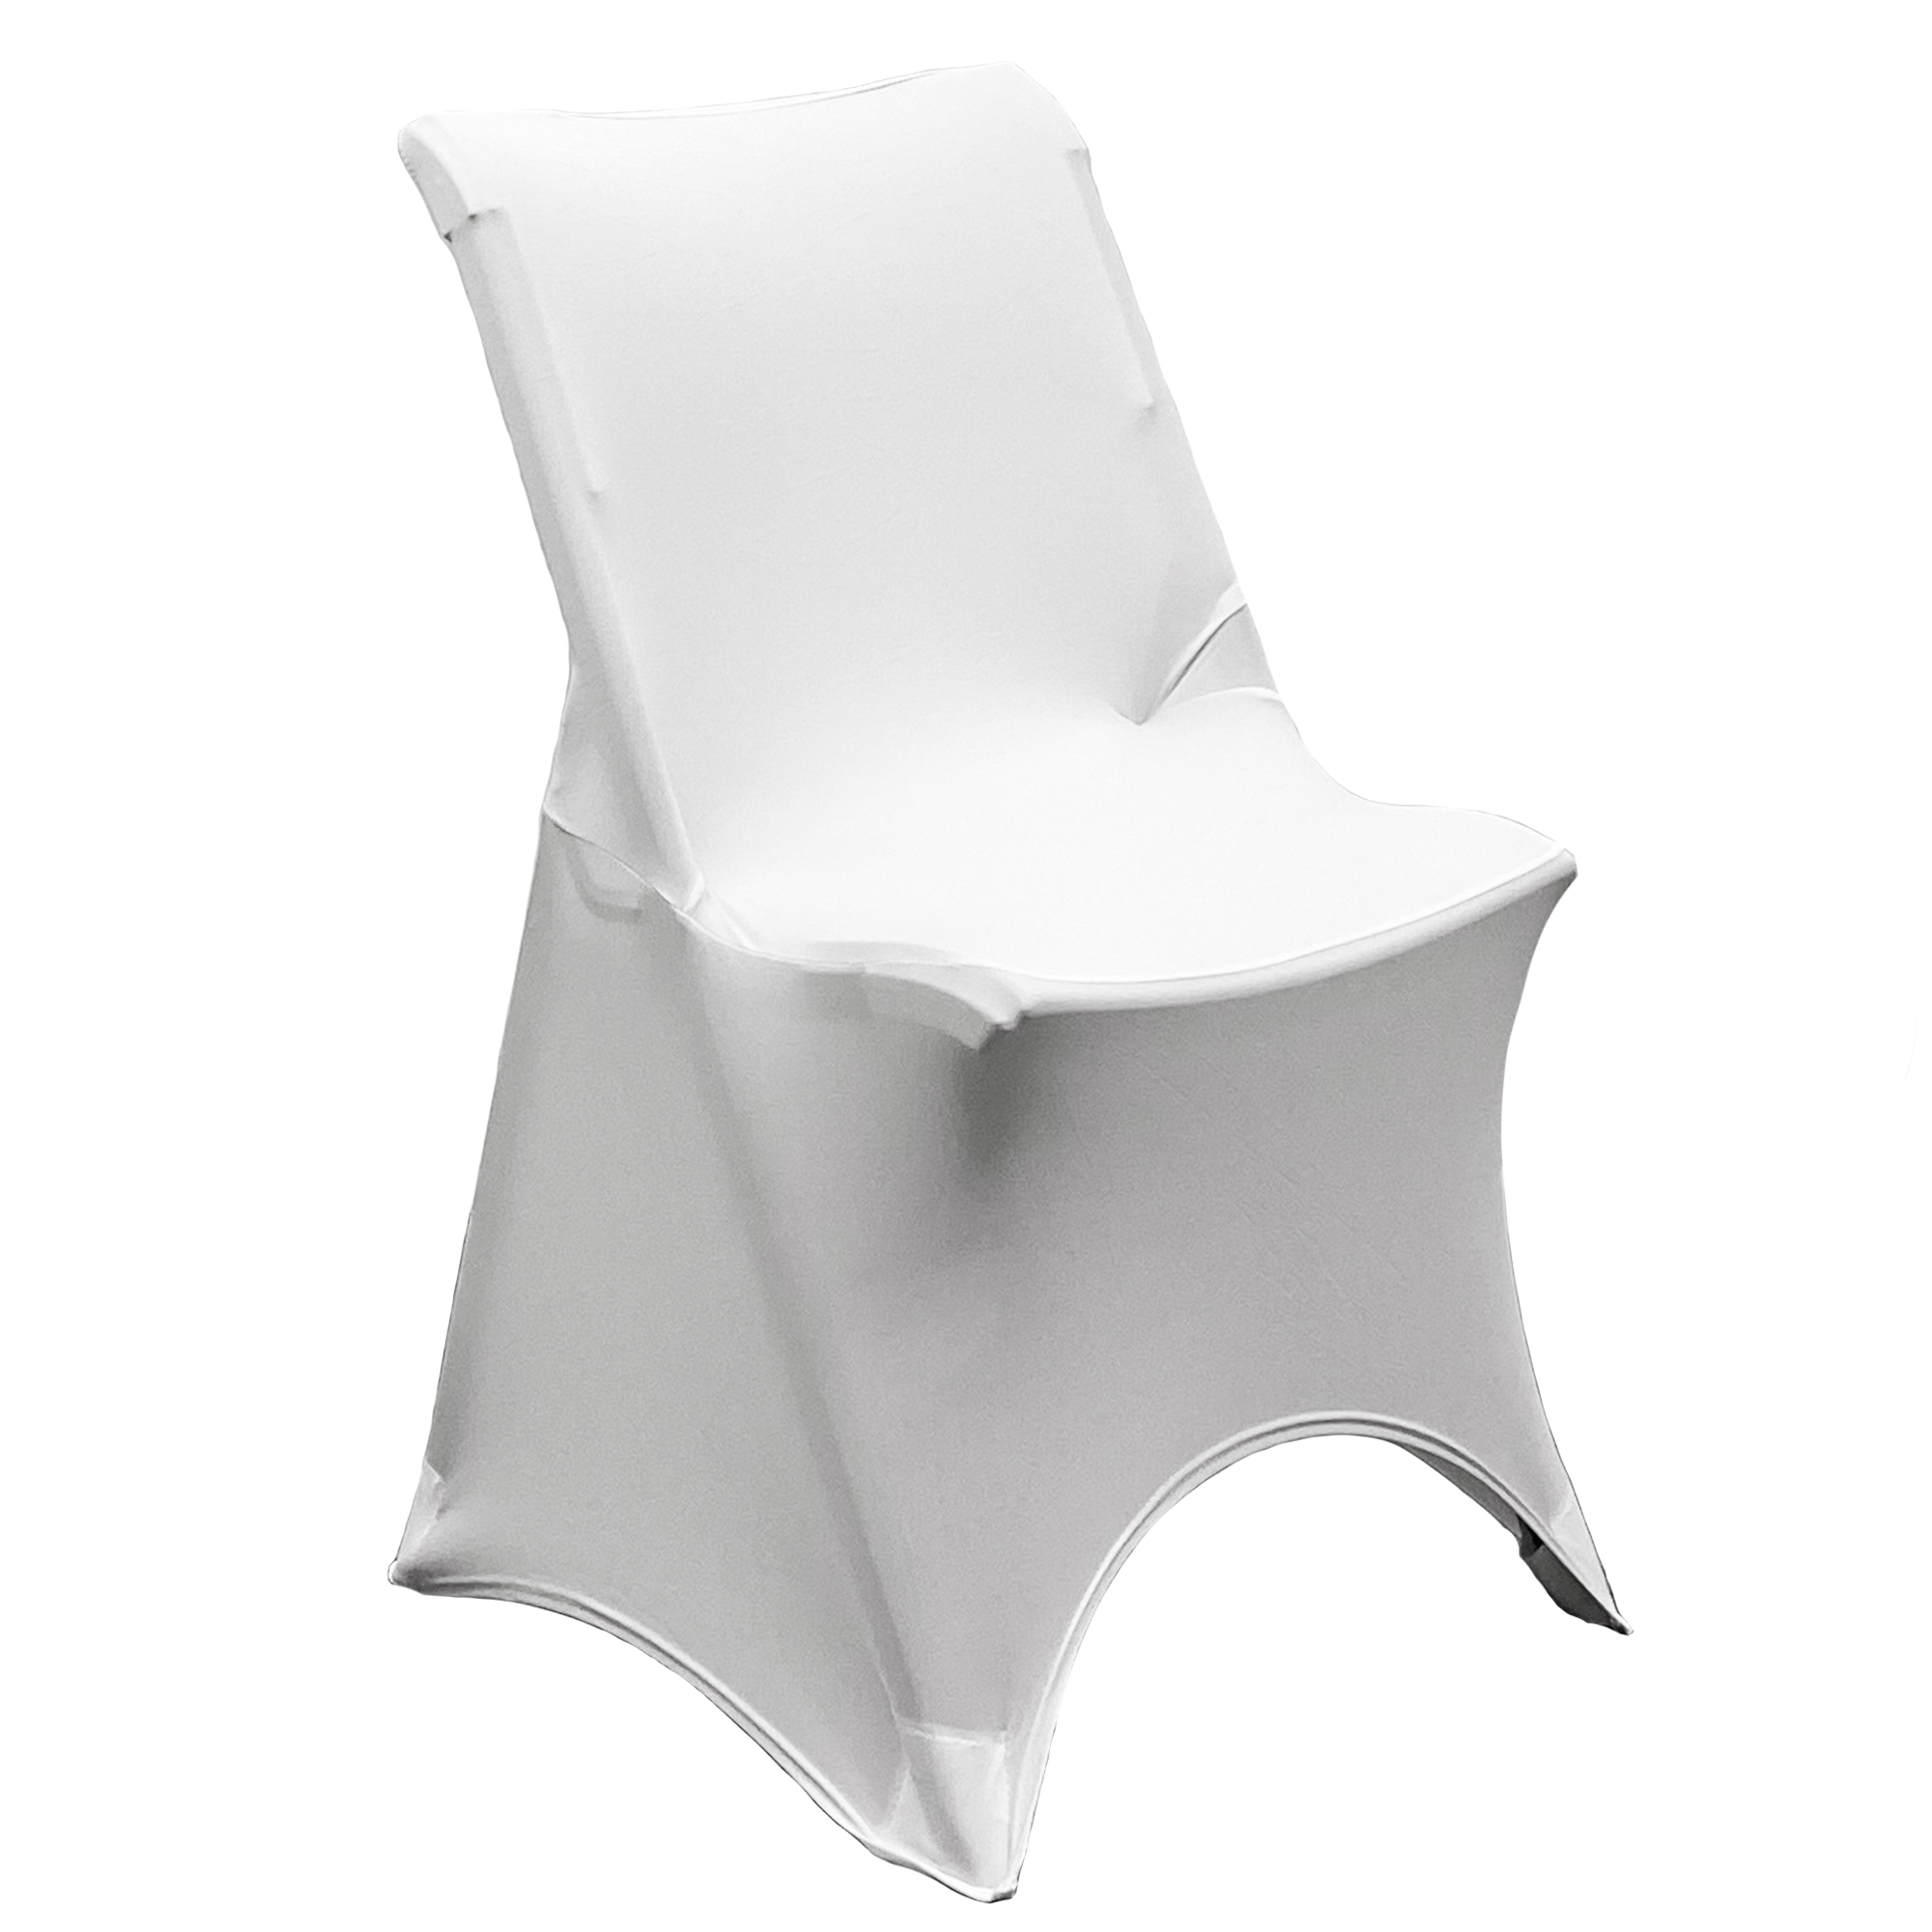 Champagne Lifetime Folding Spandex Chair Covers, Stretch Lycra